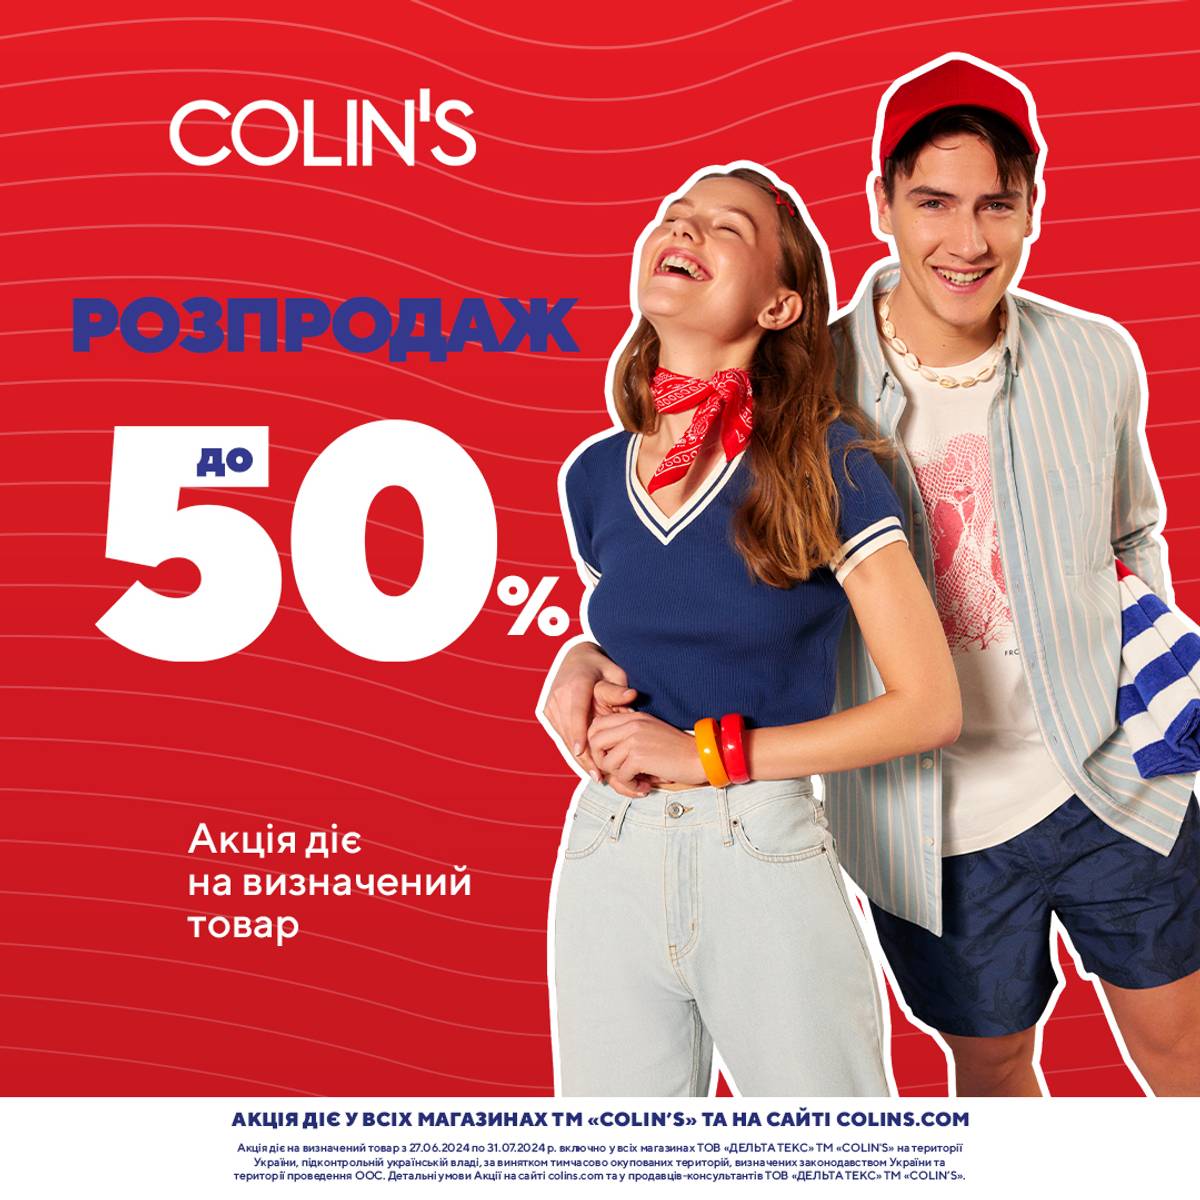 Discounts in COLIN'S up to 50%